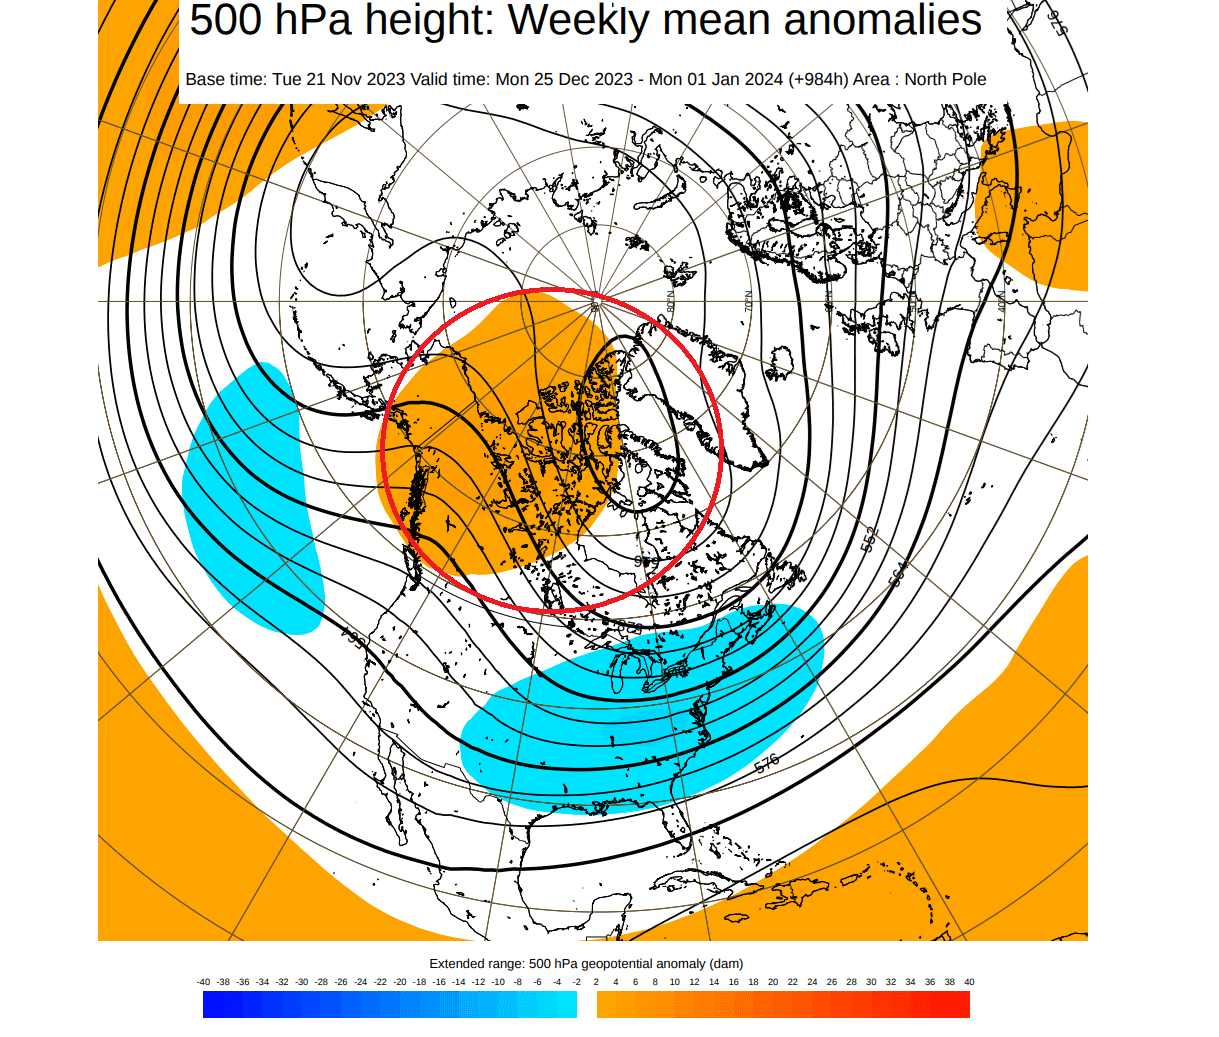 polar-vortex-winter-pressure-anomaly-forecast-late-december-ecmwf-extended-anomaly-eastern-united-states-cold-weather